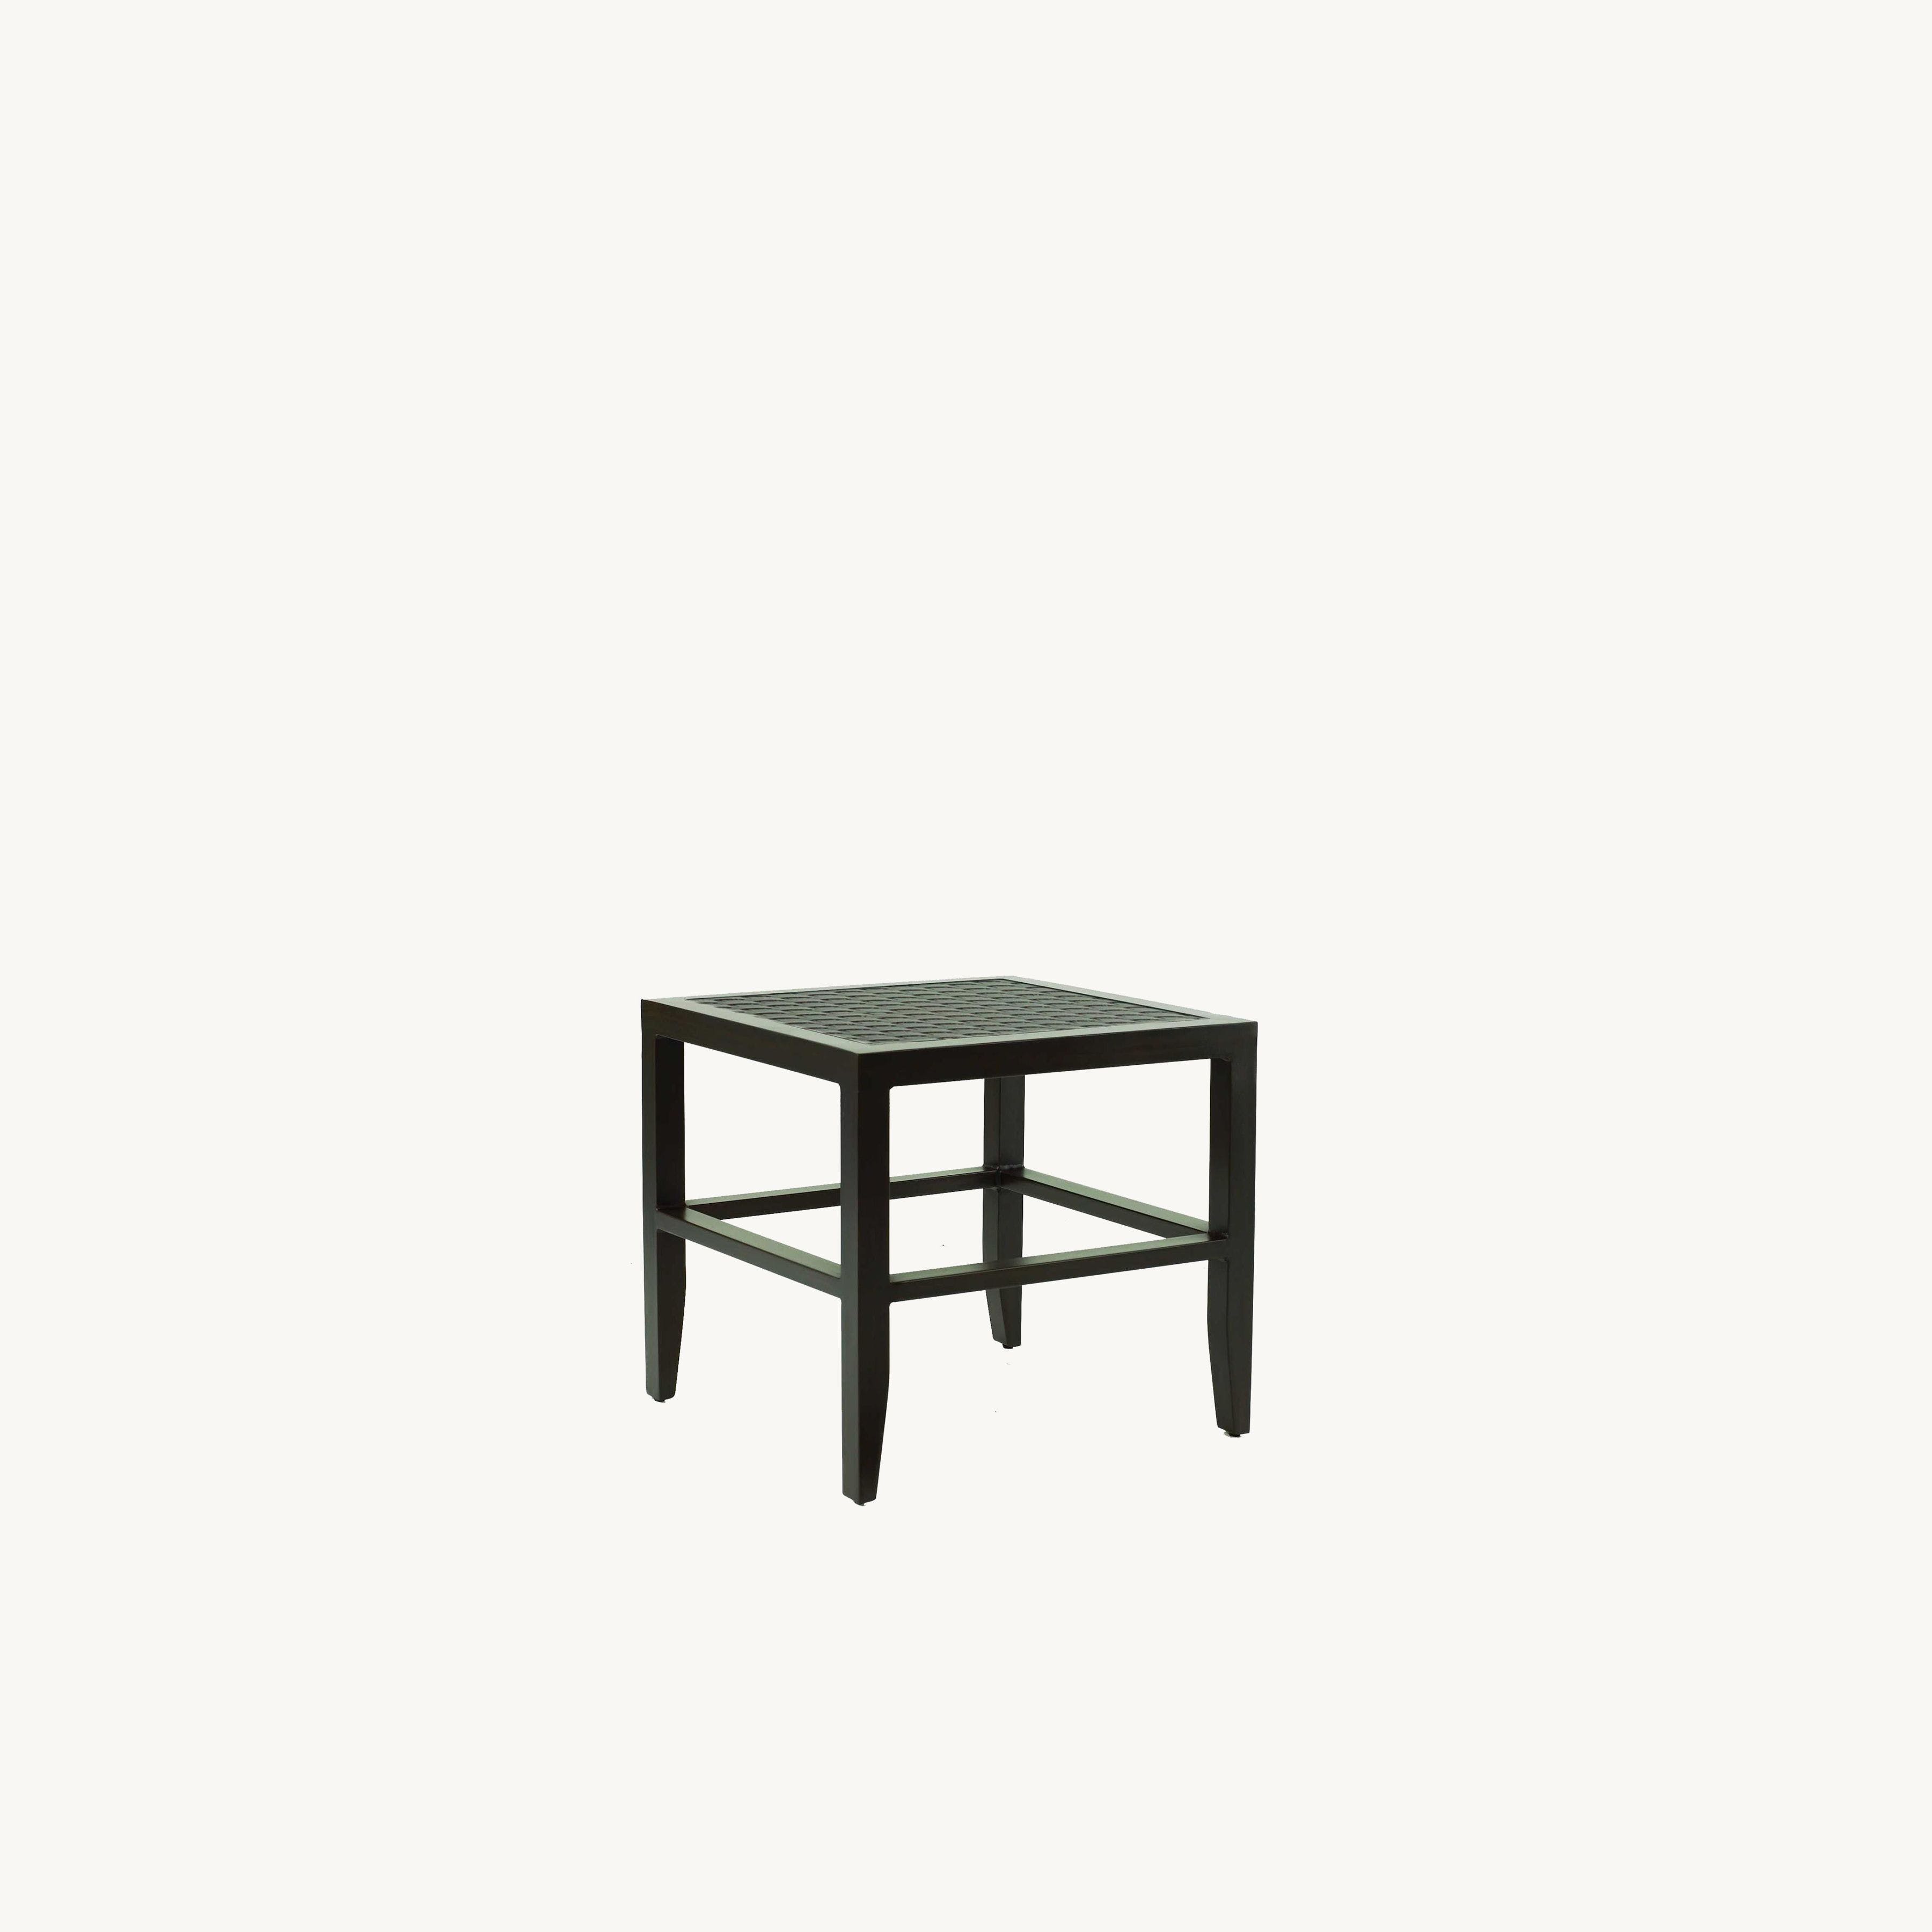 Classical 20" Square Side Tables By Castelle